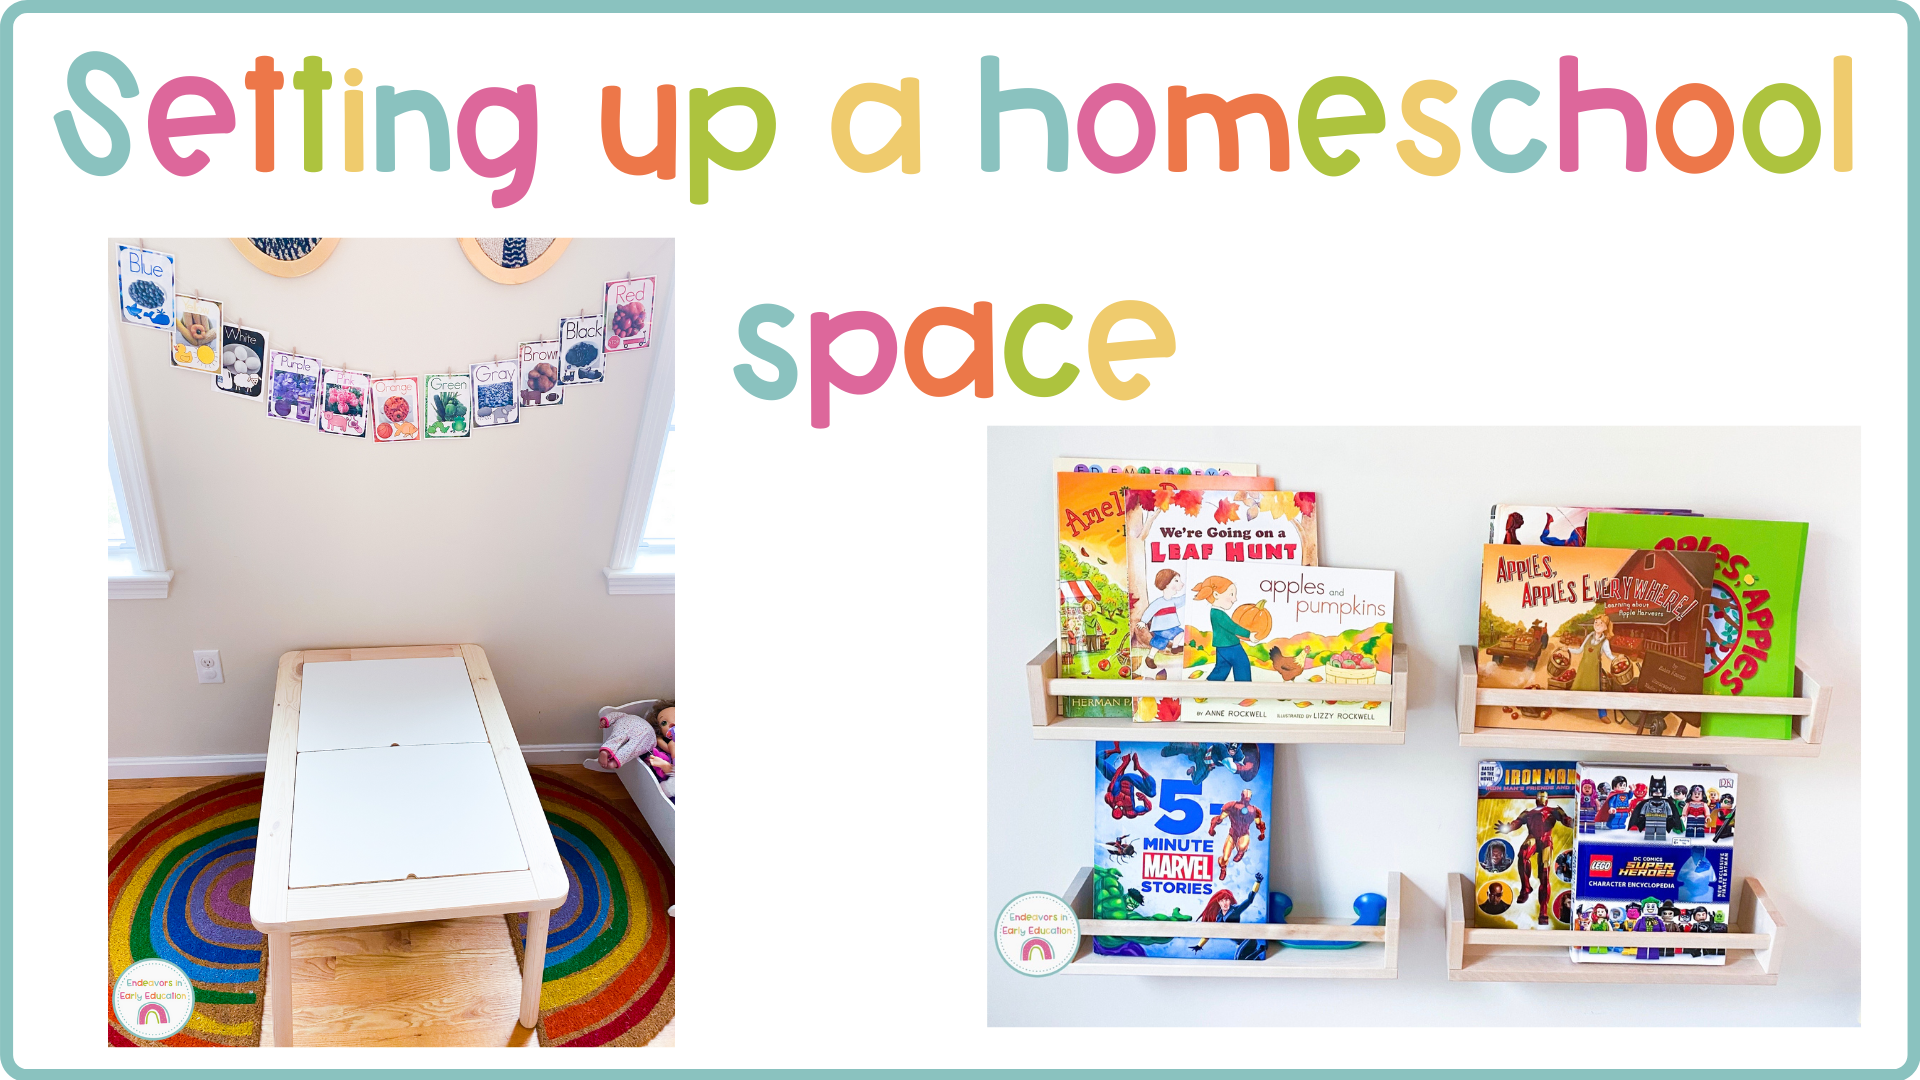 Featured image: Setting up a homeschool space